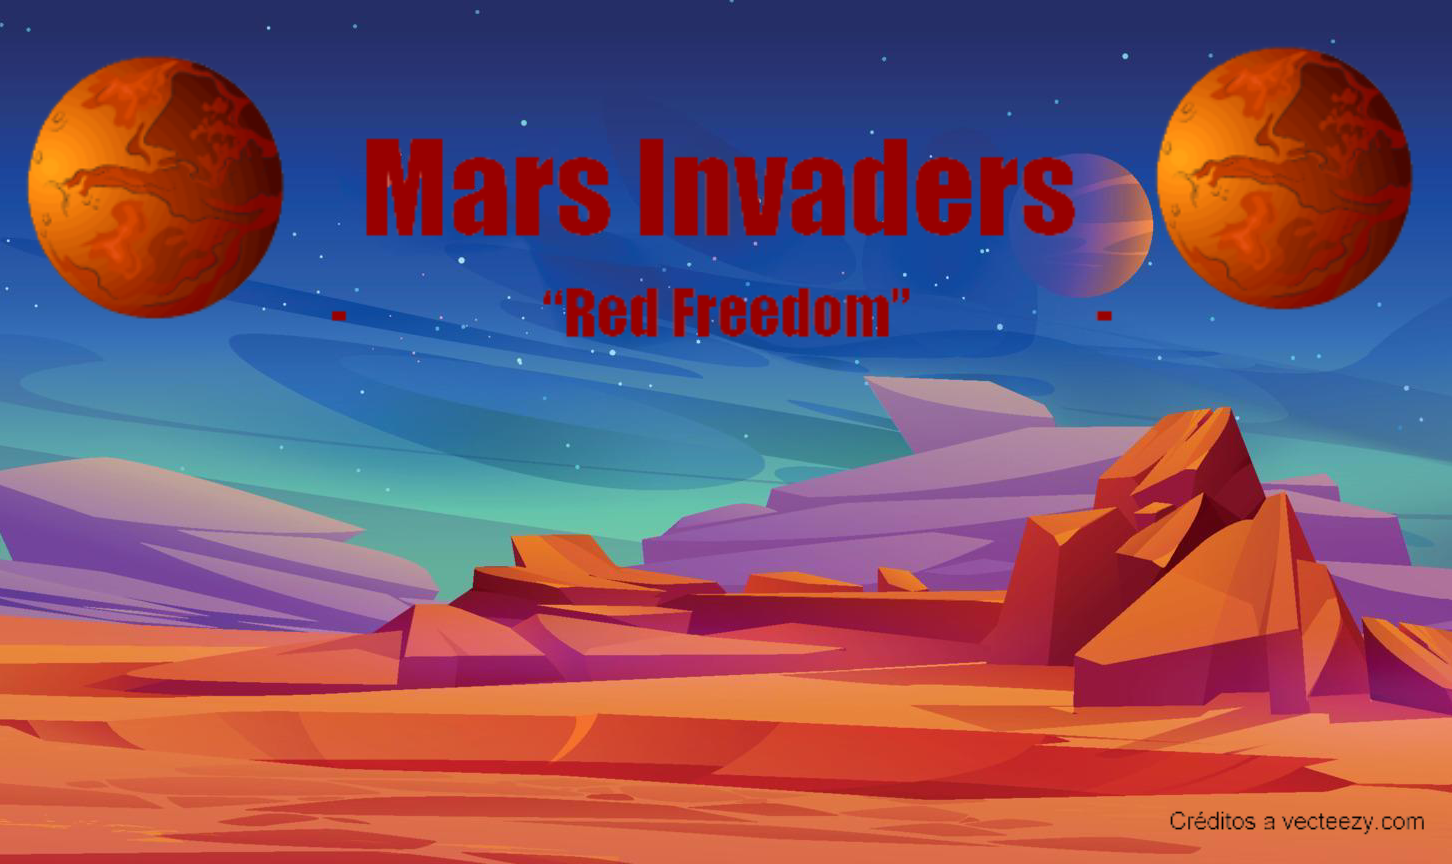 Mars Invaders "Red Freedom"